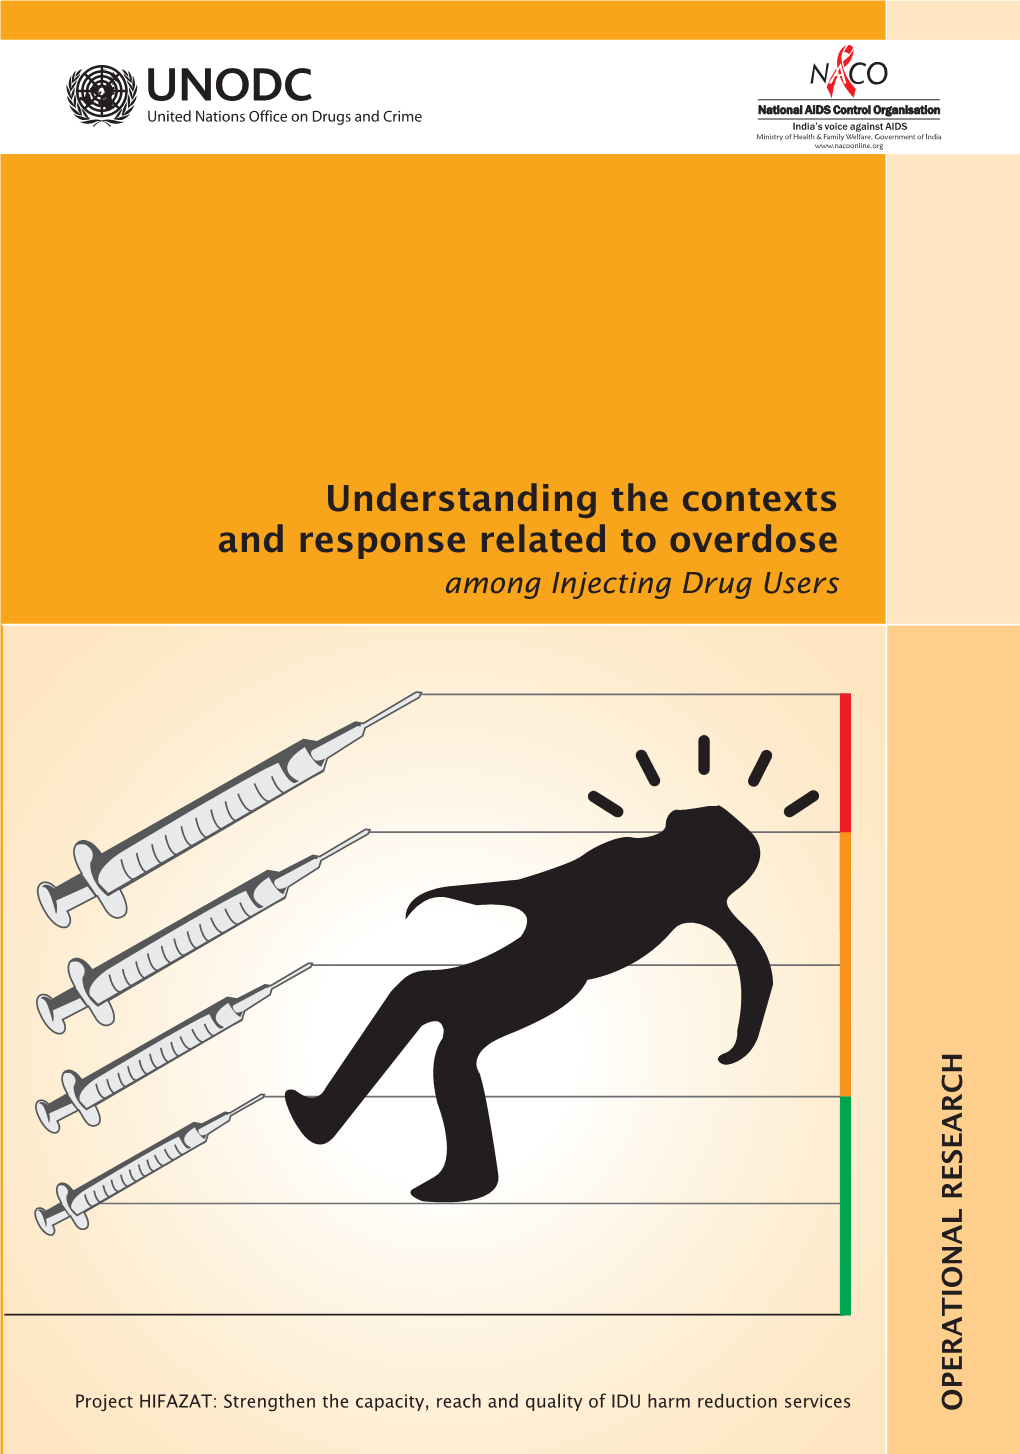 Operational Research Understanding the Contexts and Response Related to Overdose Among Injecting Drug Users